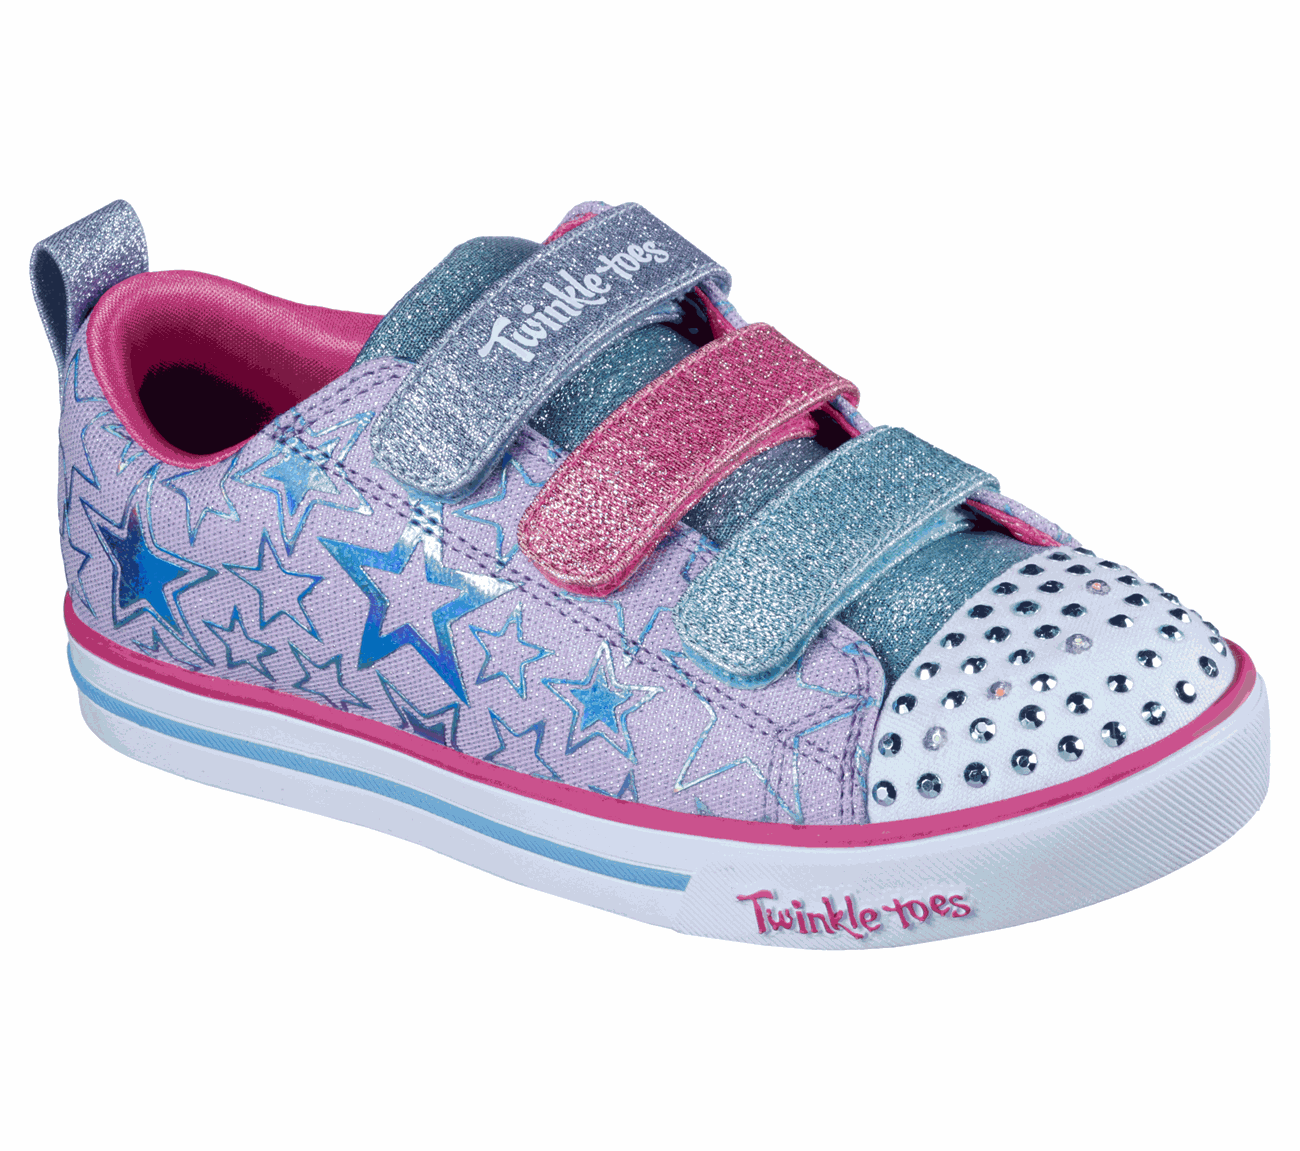 twinkle toes size 8